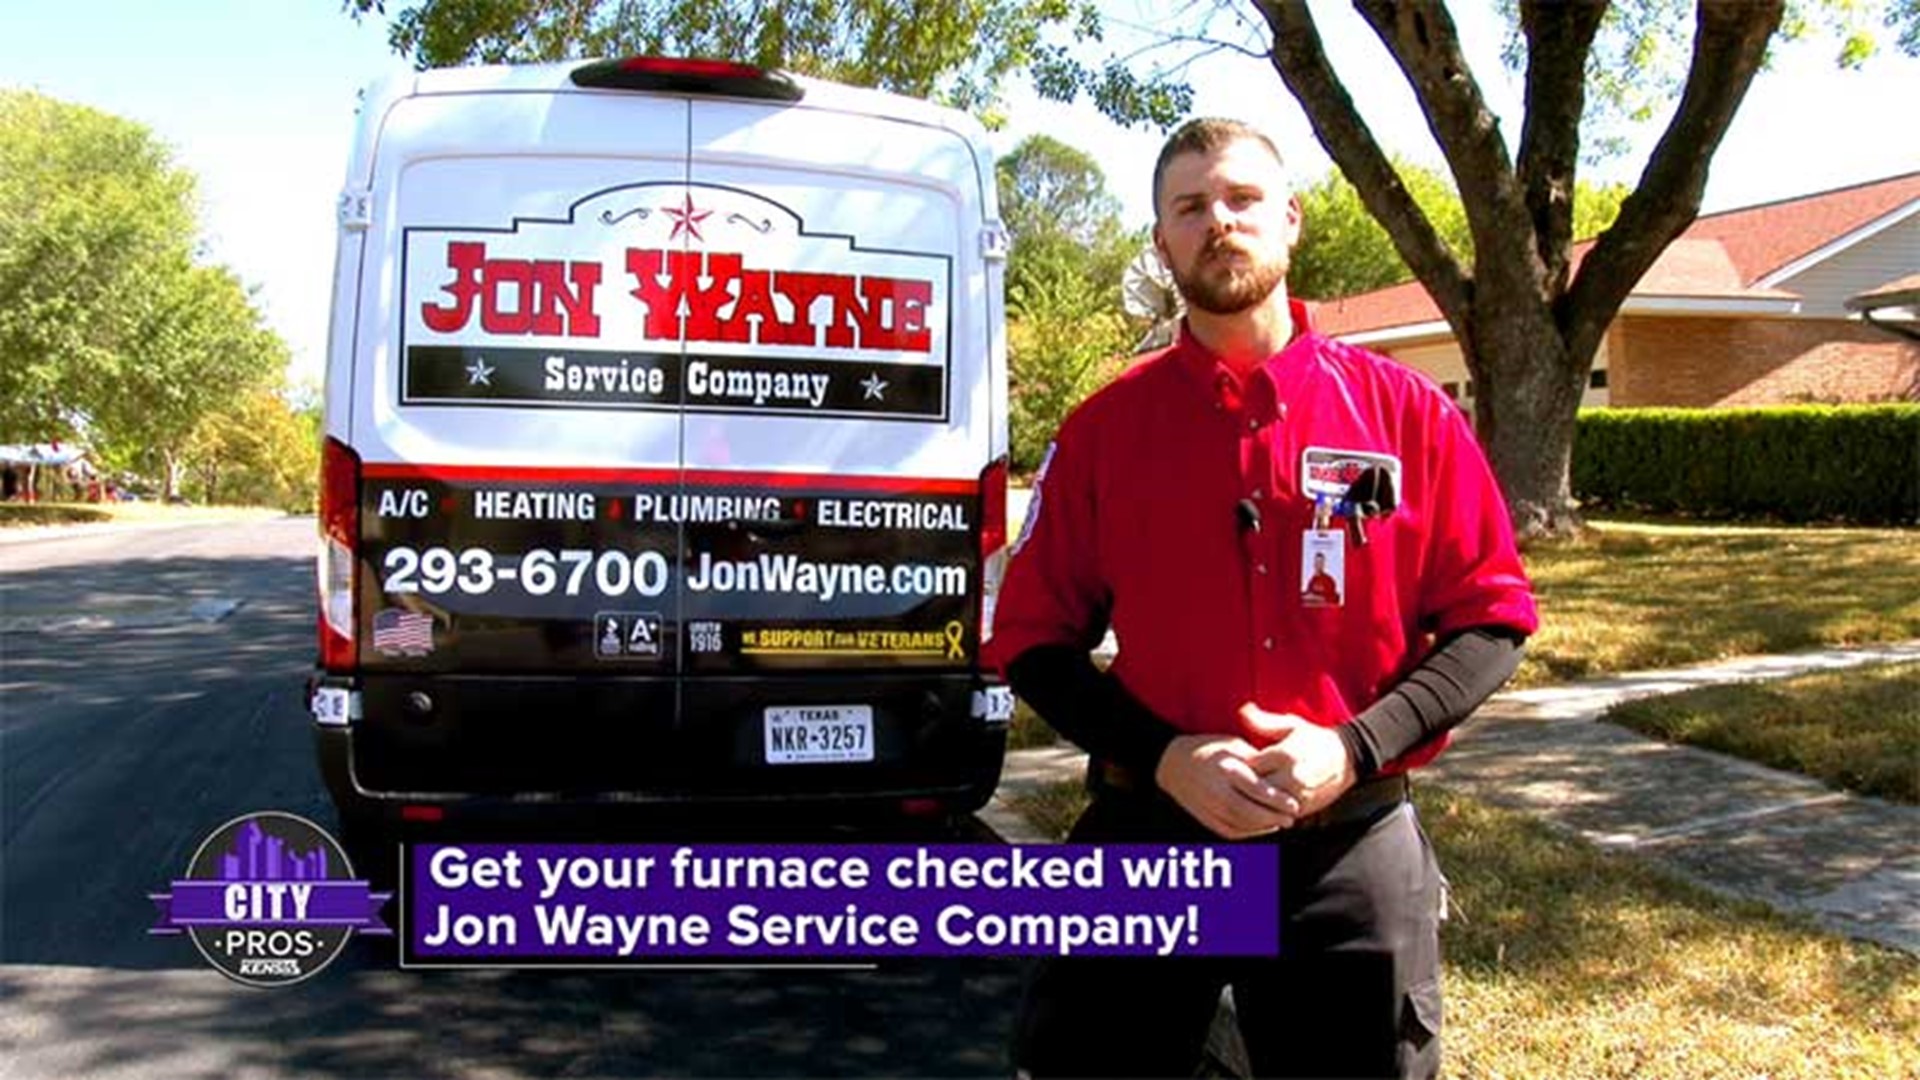 You should get your furnace checked for safety and efficiency before winter when heating is needed.